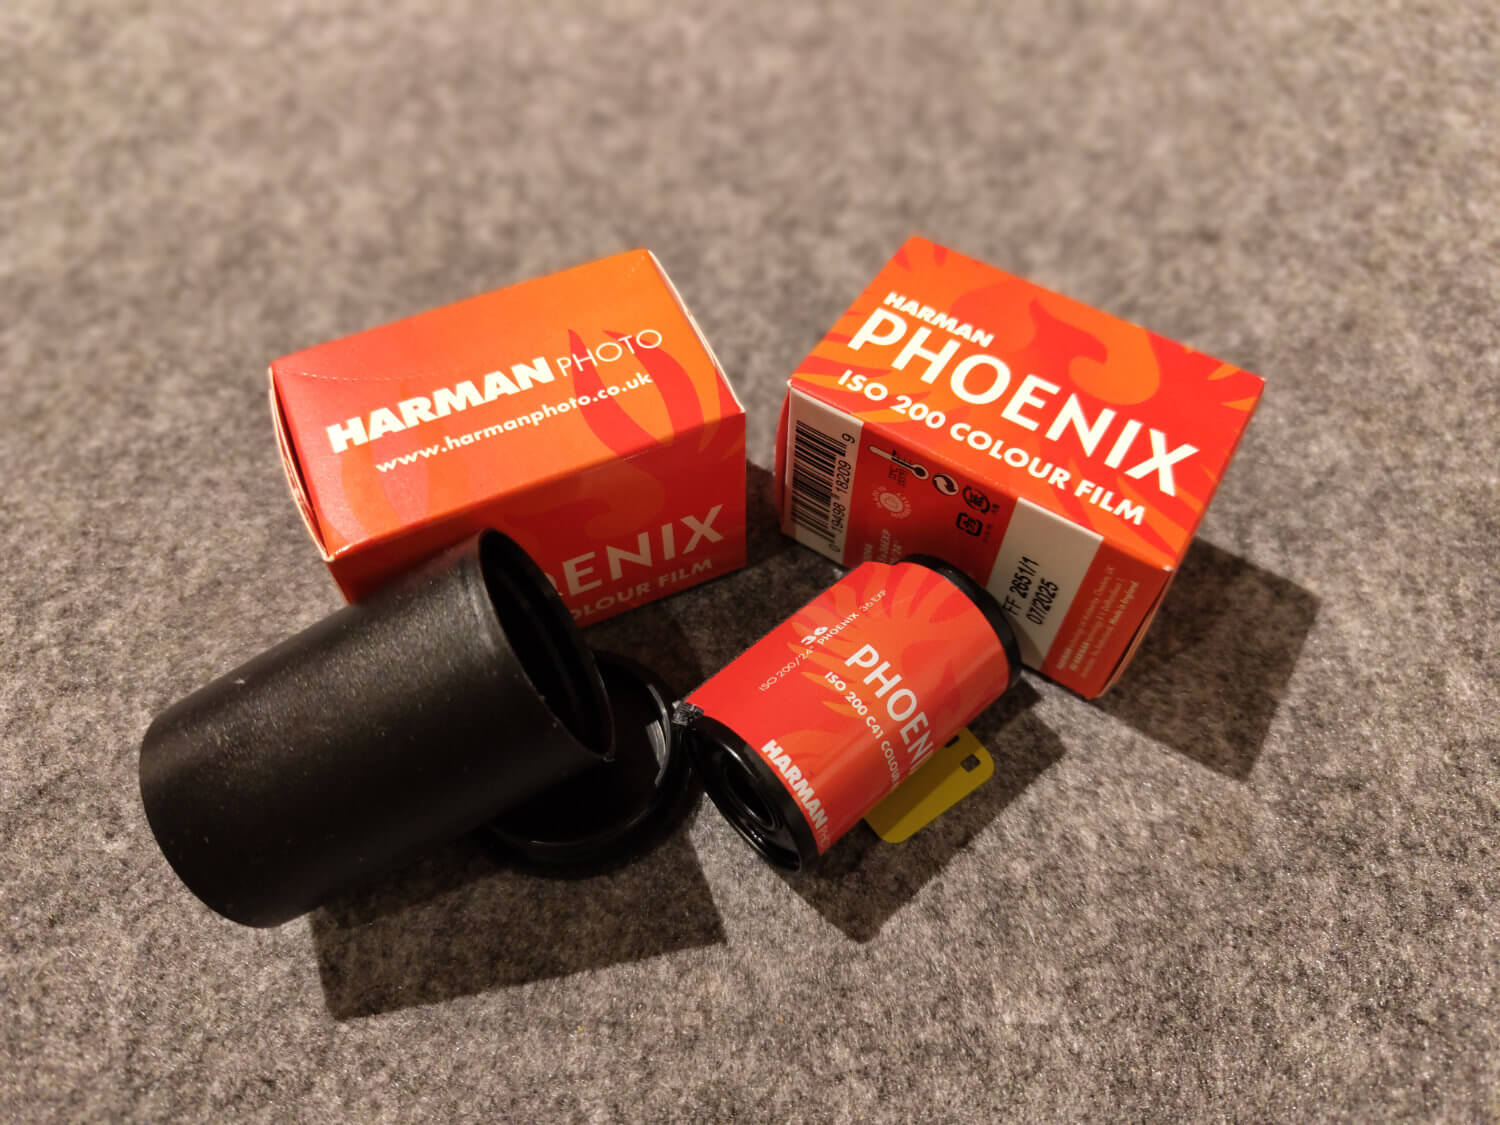 New film day! Say hello to HARMAN Phoenix 200, a brand new mid-speed colour film